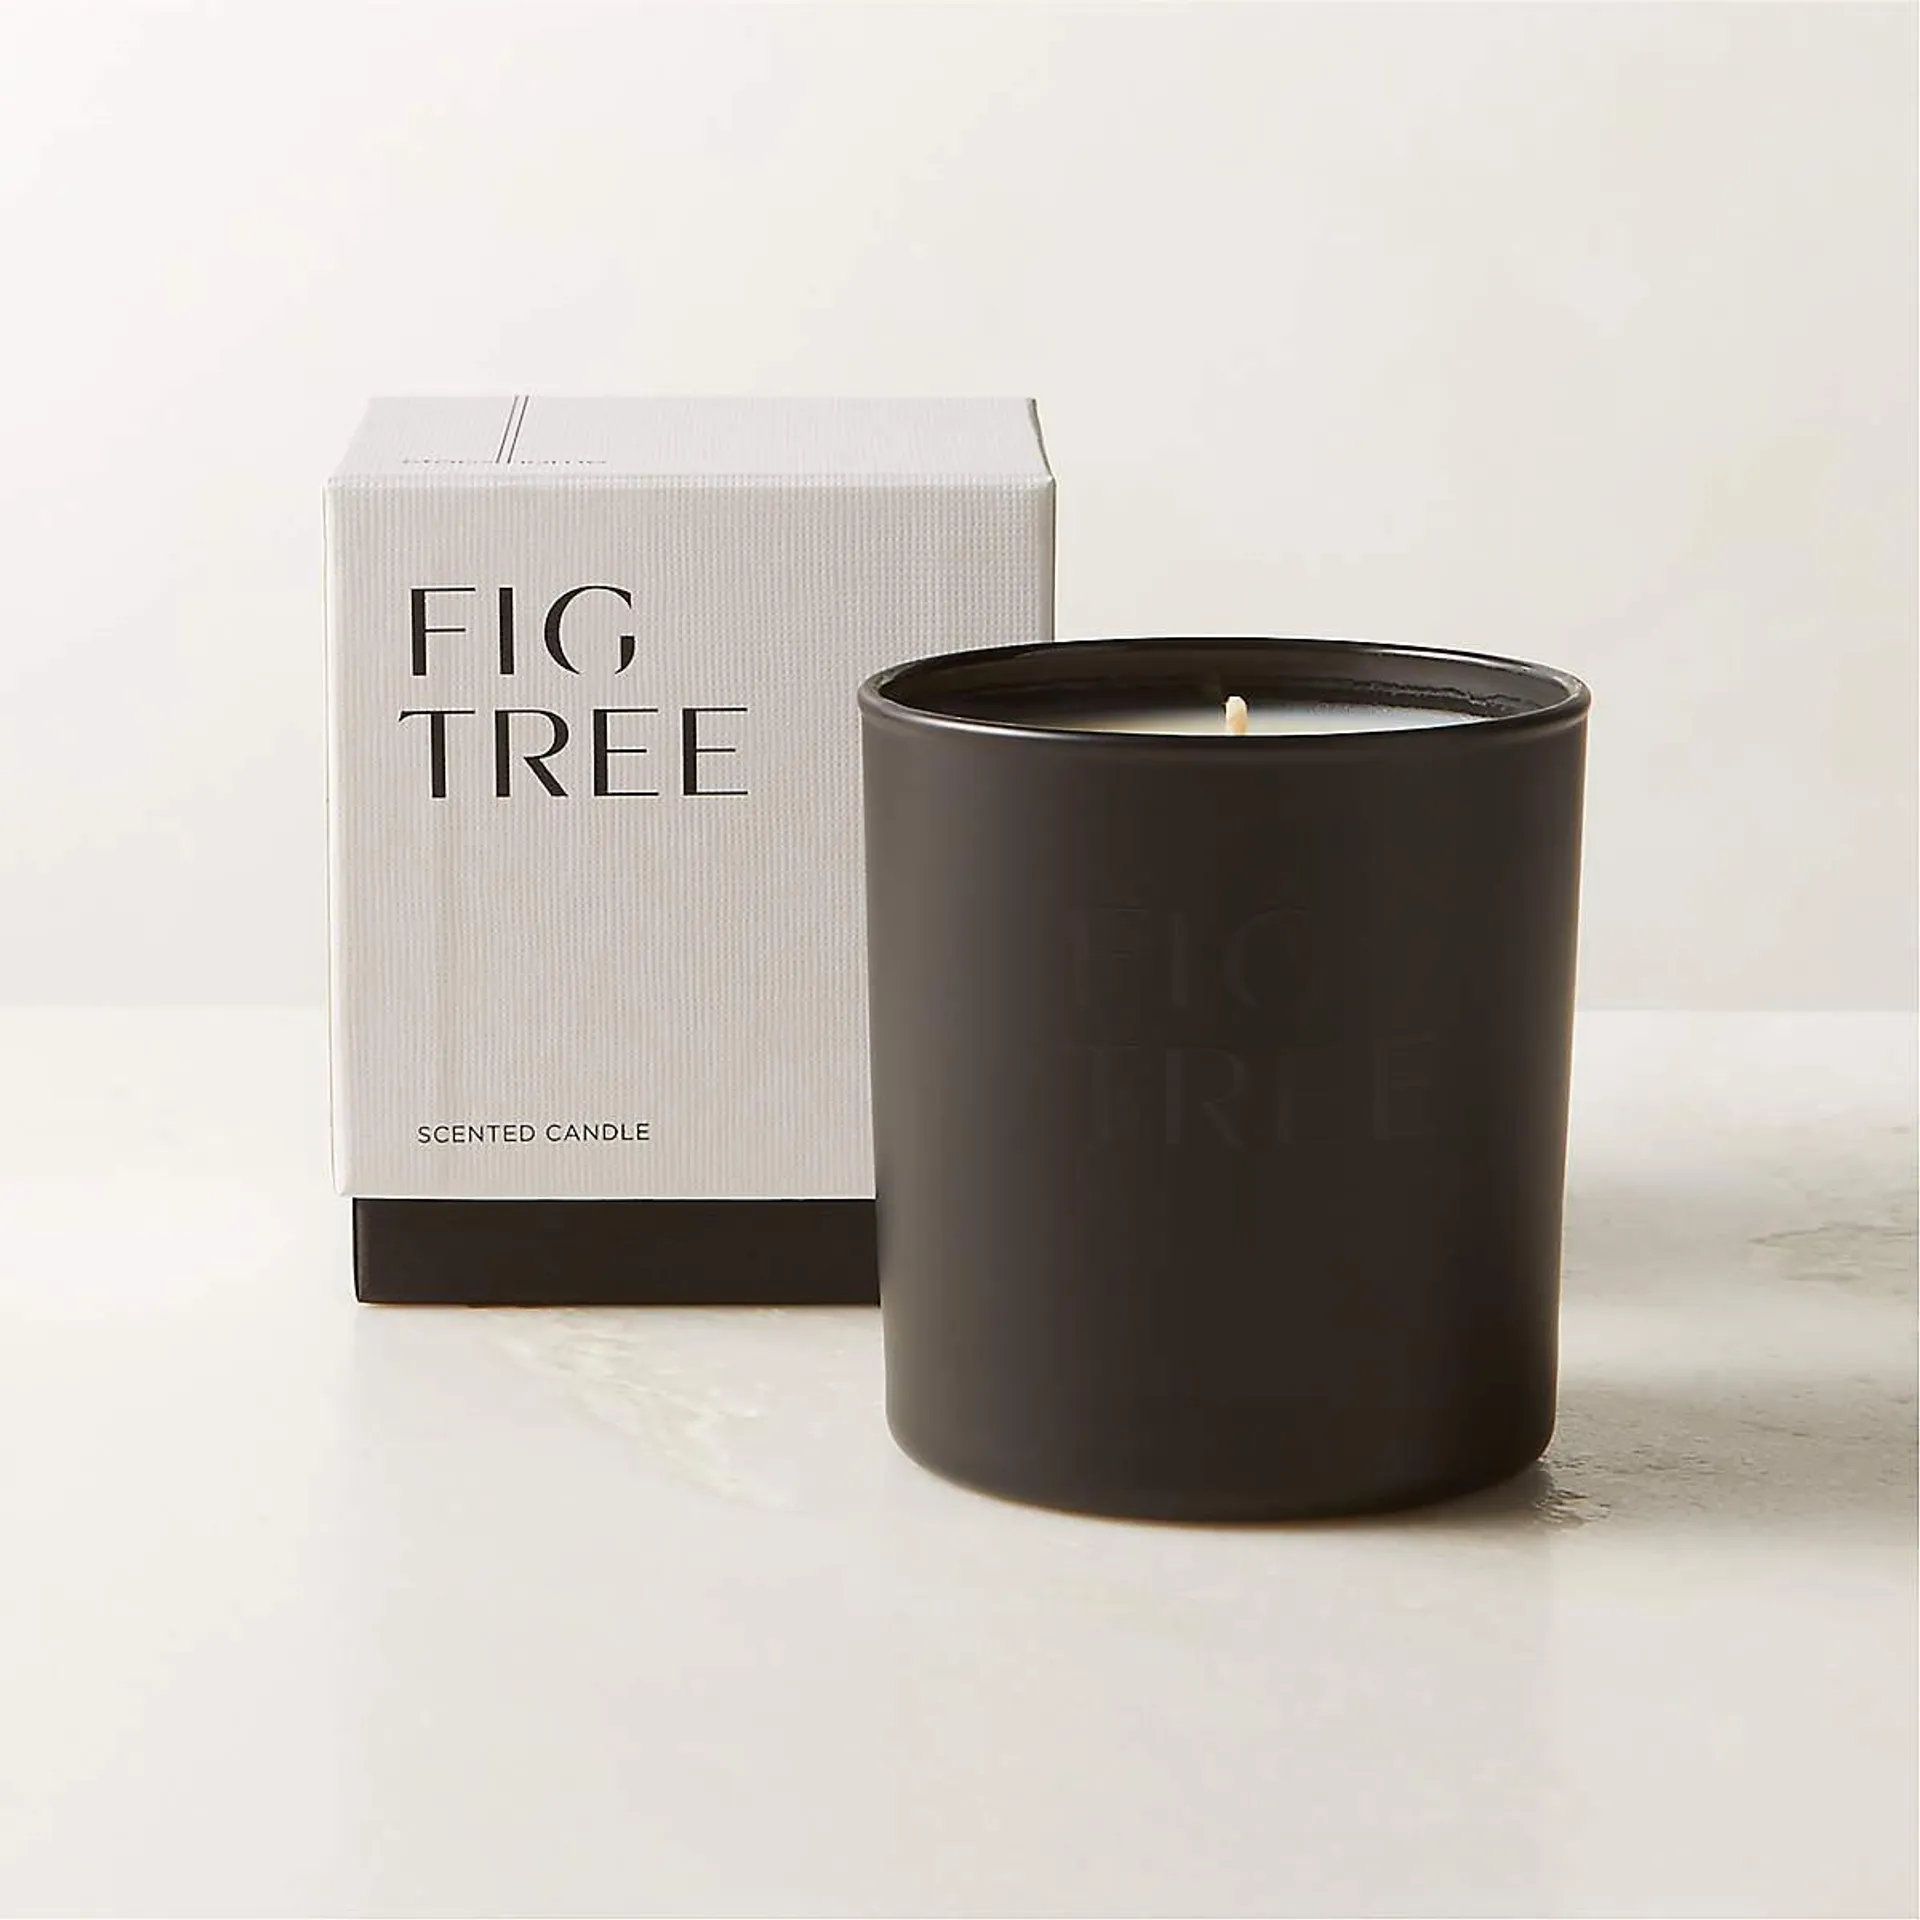 Stockhome Fig Tree Scented Candle 8oz